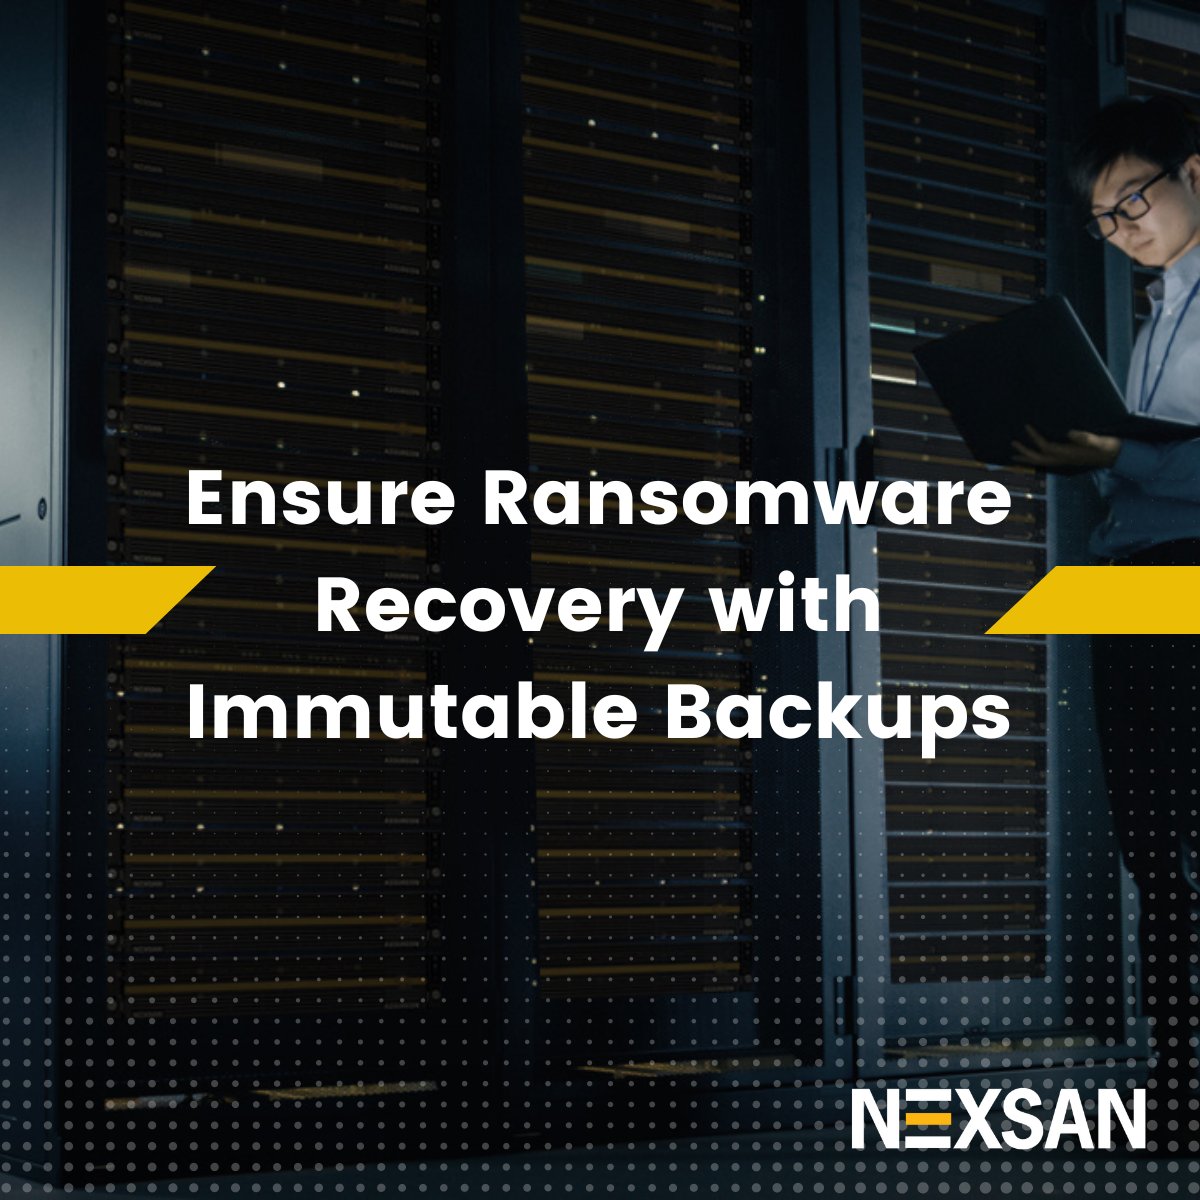 In anticipation of World Backup Day on March 31st, Nexsan underscores the critical need for robust data protection with its innovative immutable backup solutions. 'The last line of defense is your backup. Don’t let that fail you.' Read the Press Release. tinyurl.com/EnsureRansomwa…